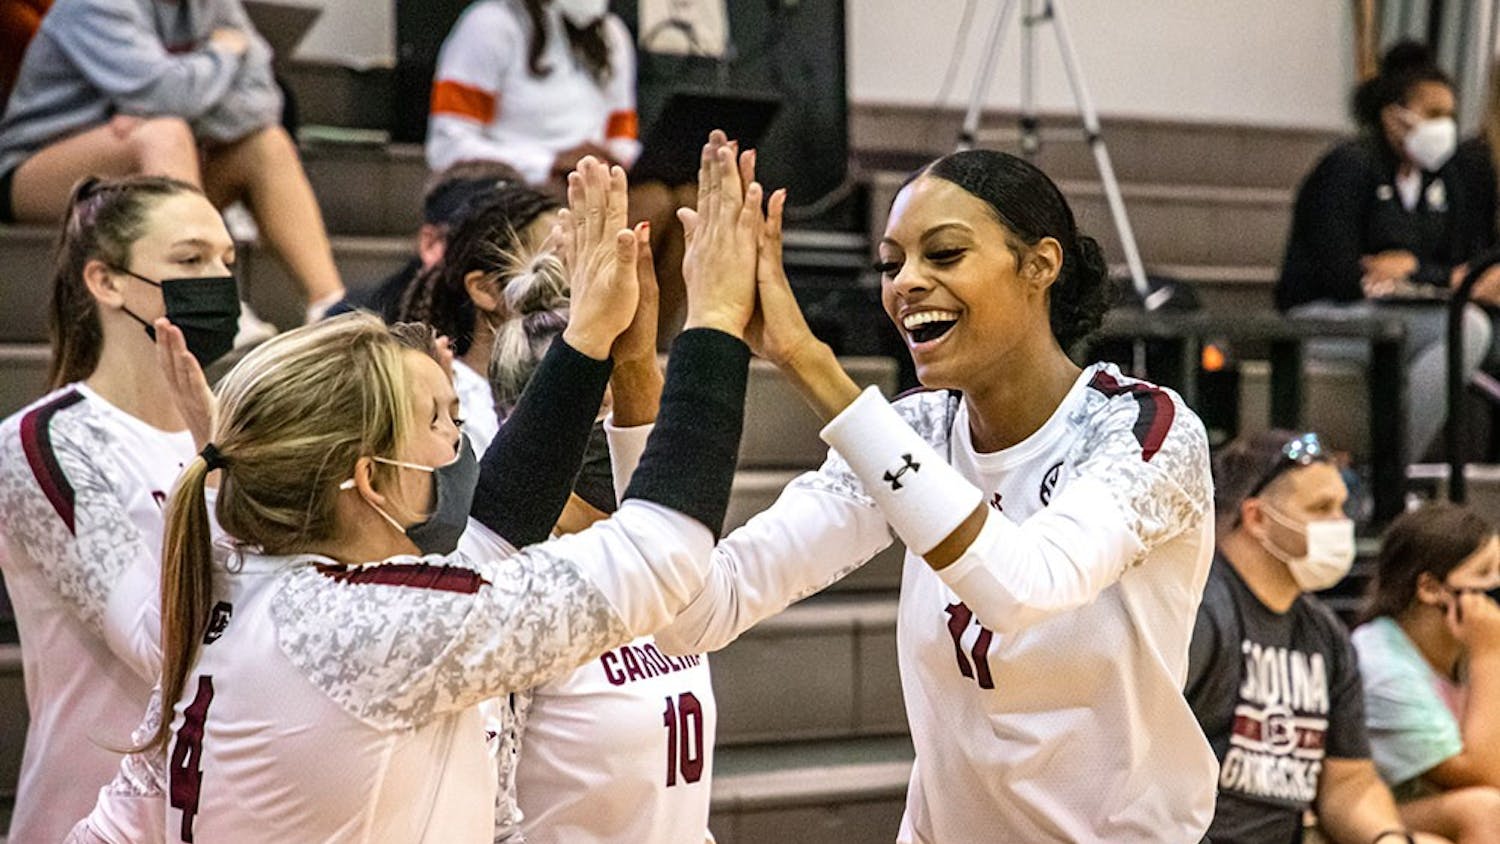 Senior Lauren Bowers high-fives senior Mikayla Robinson after Robinson scores a point. The Gamecocks defeated the Winthrop Eagles in three straight sets. &nbsp;